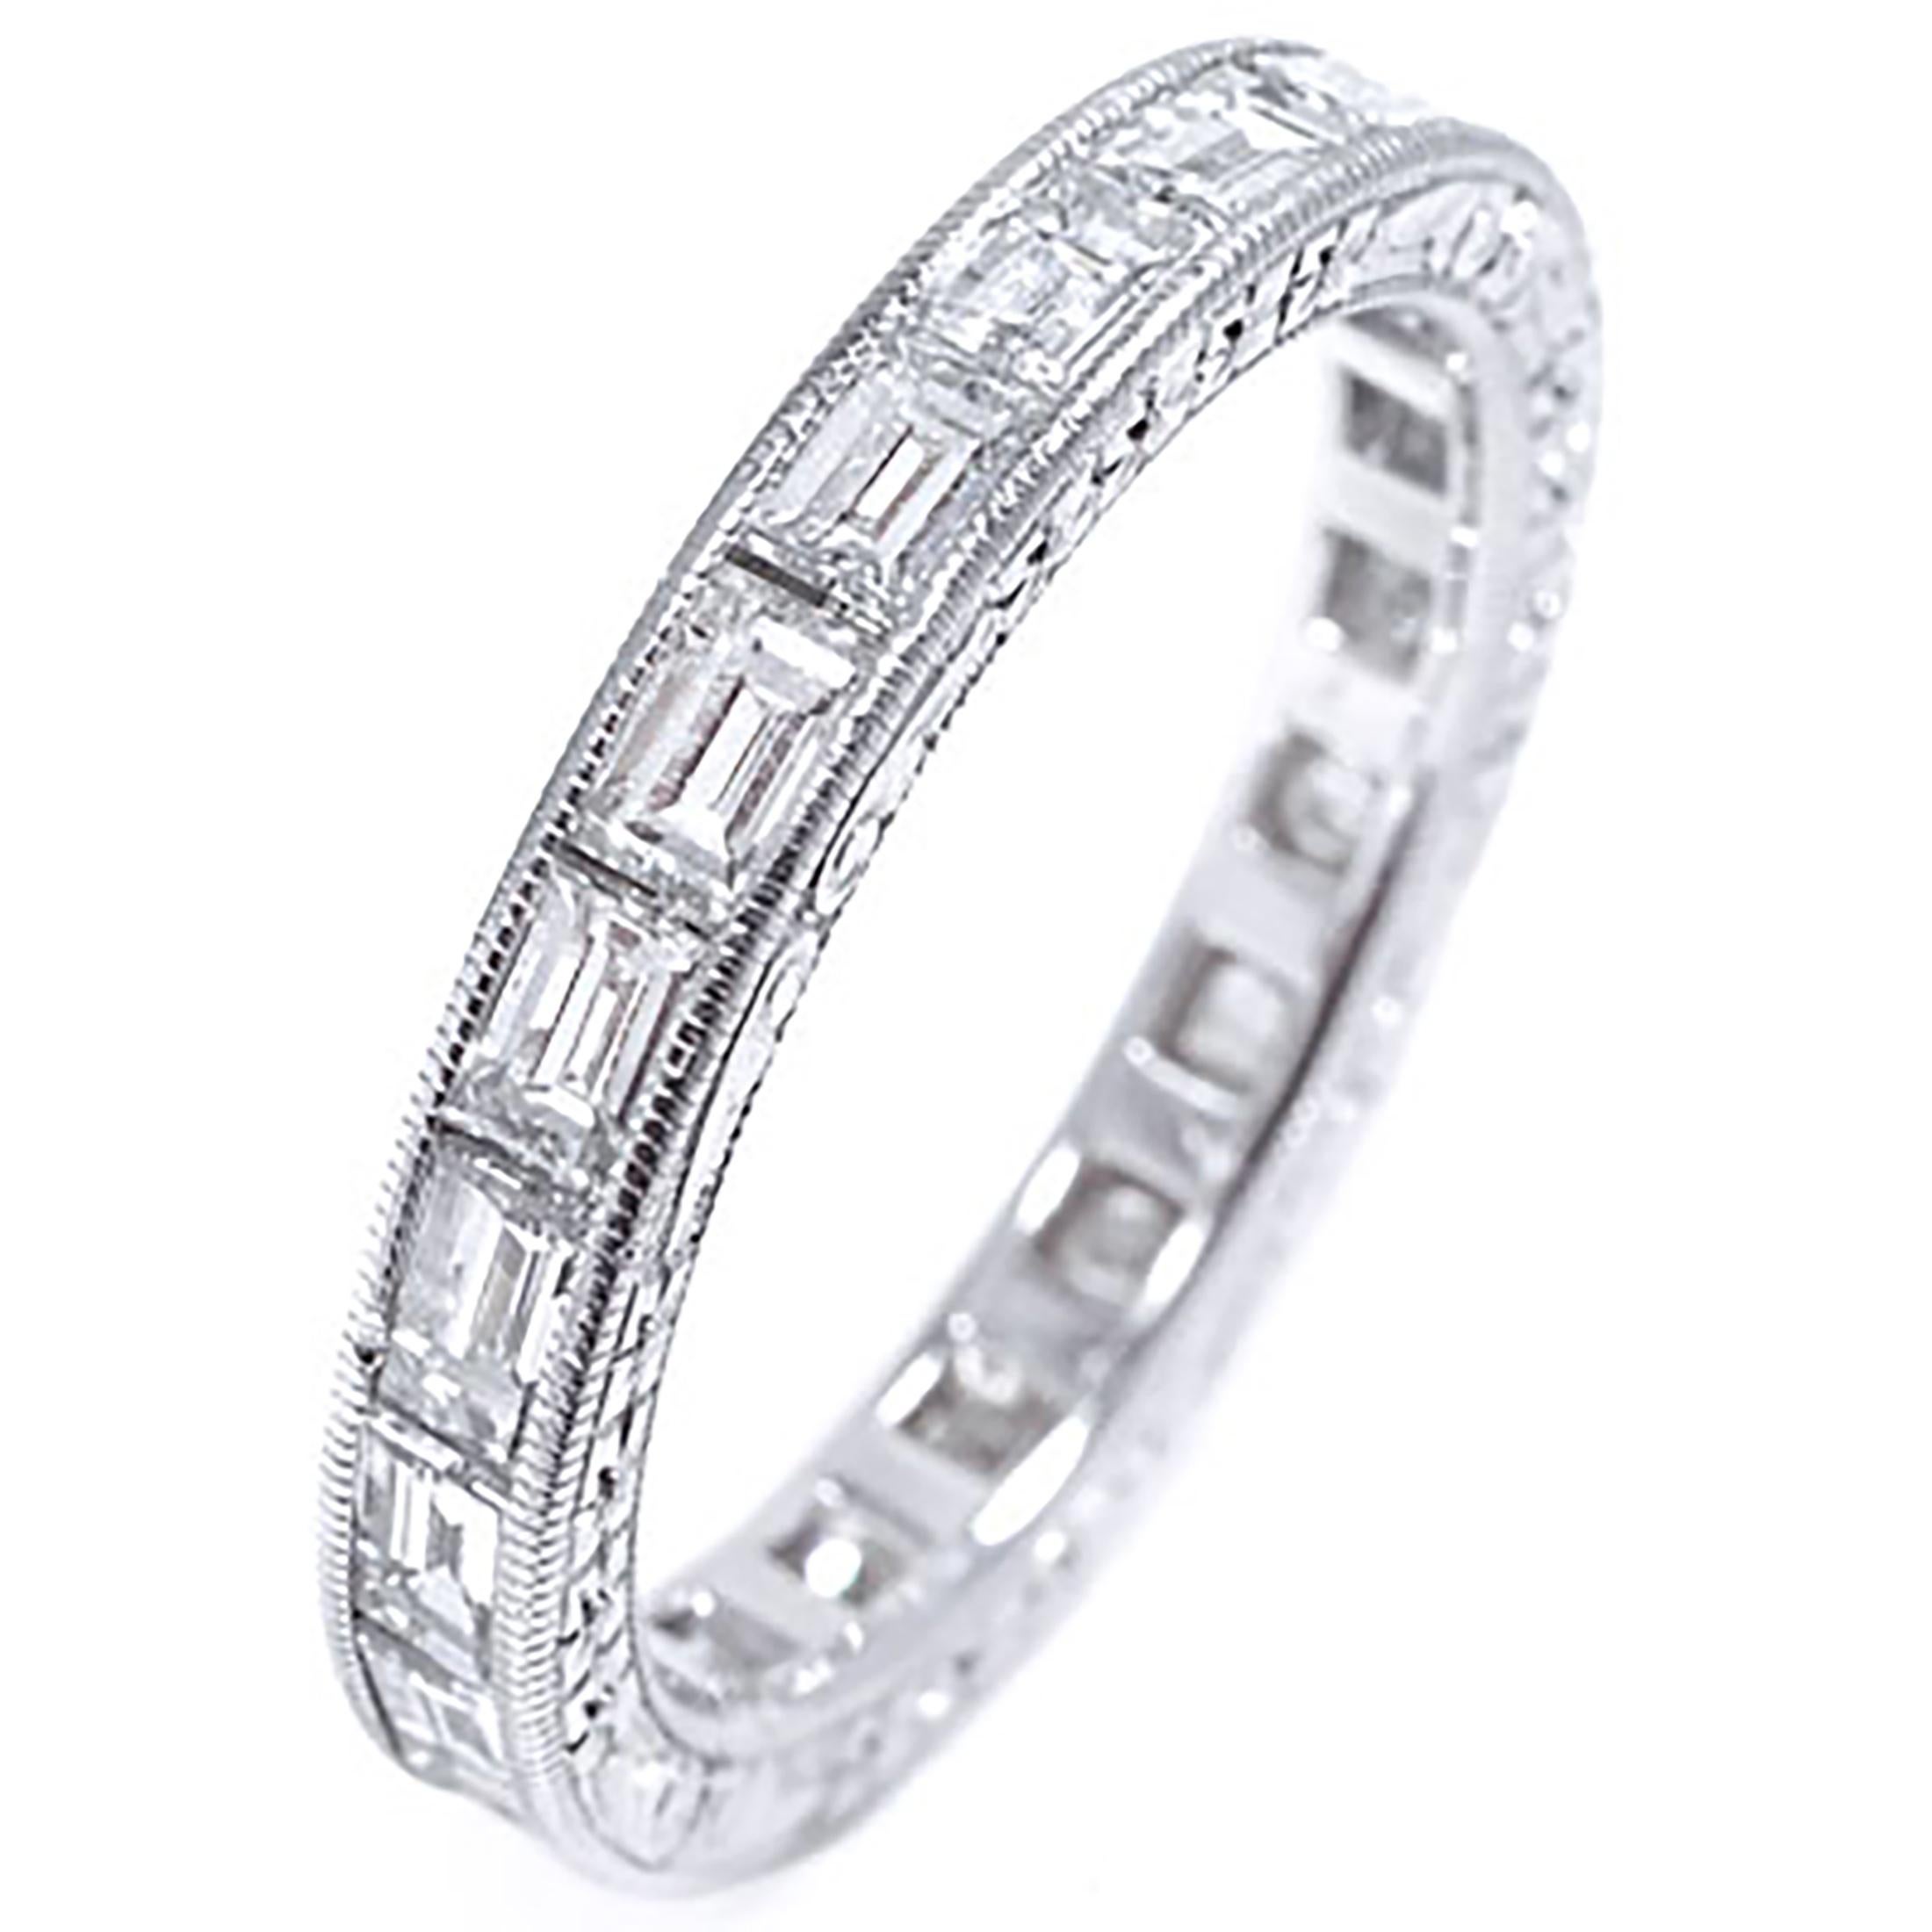 Contemporary Baguette Diamond Platinum Eternity Band with Old Master Engraving